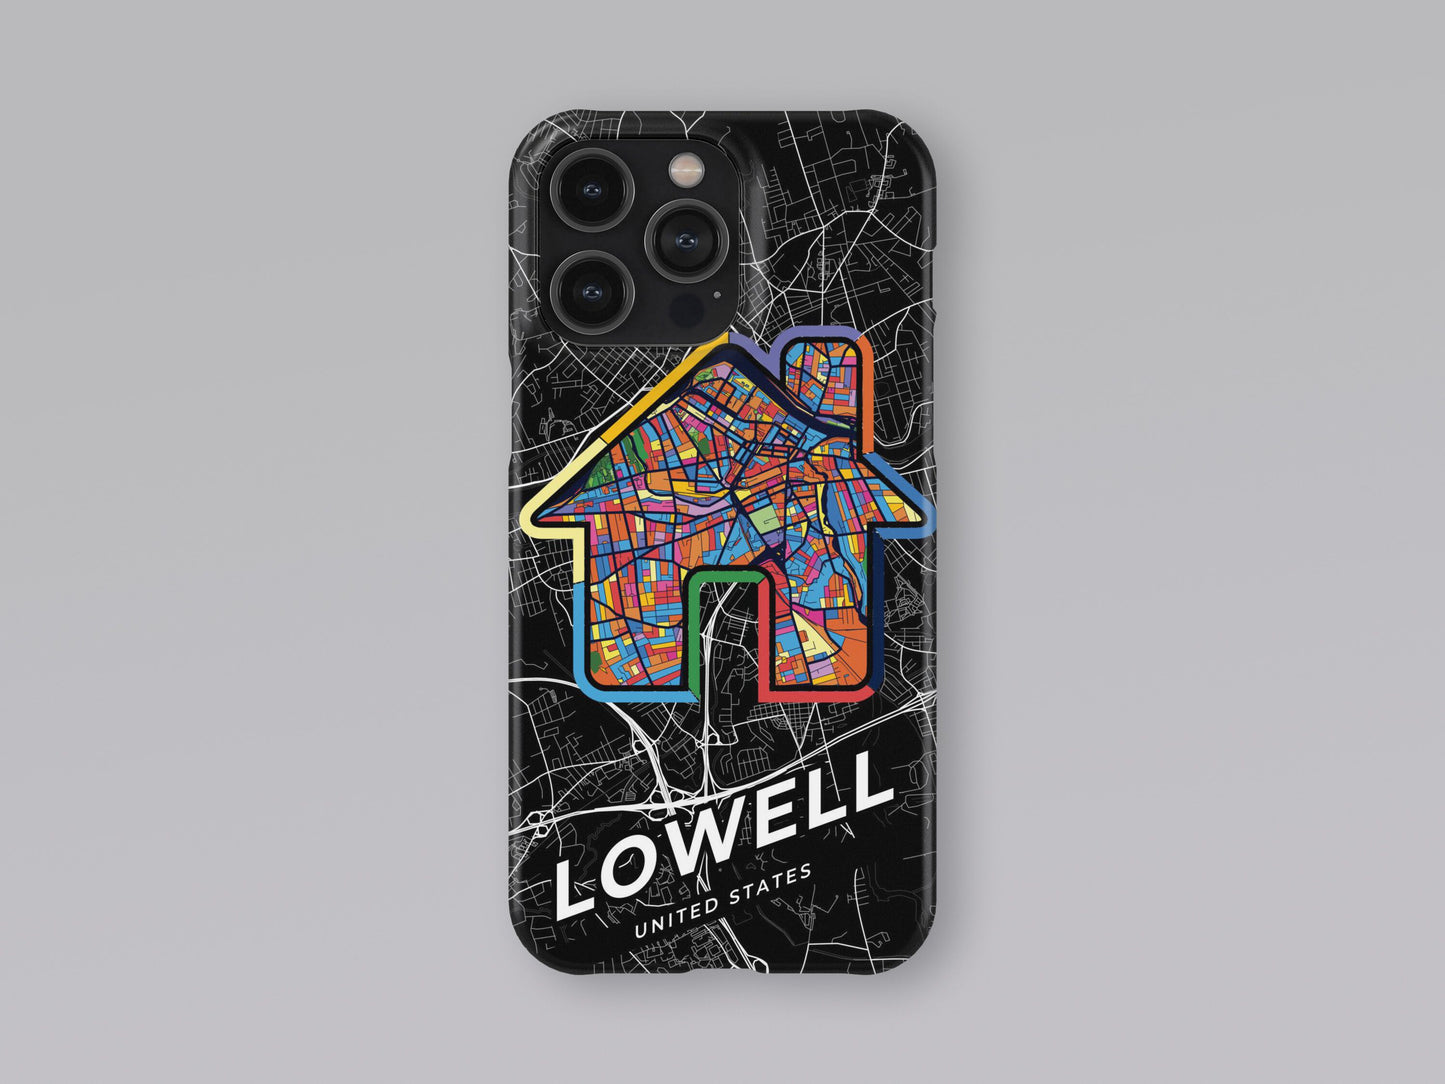 Lowell Massachusetts slim phone case with colorful icon. Birthday, wedding or housewarming gift. Couple match cases. 3